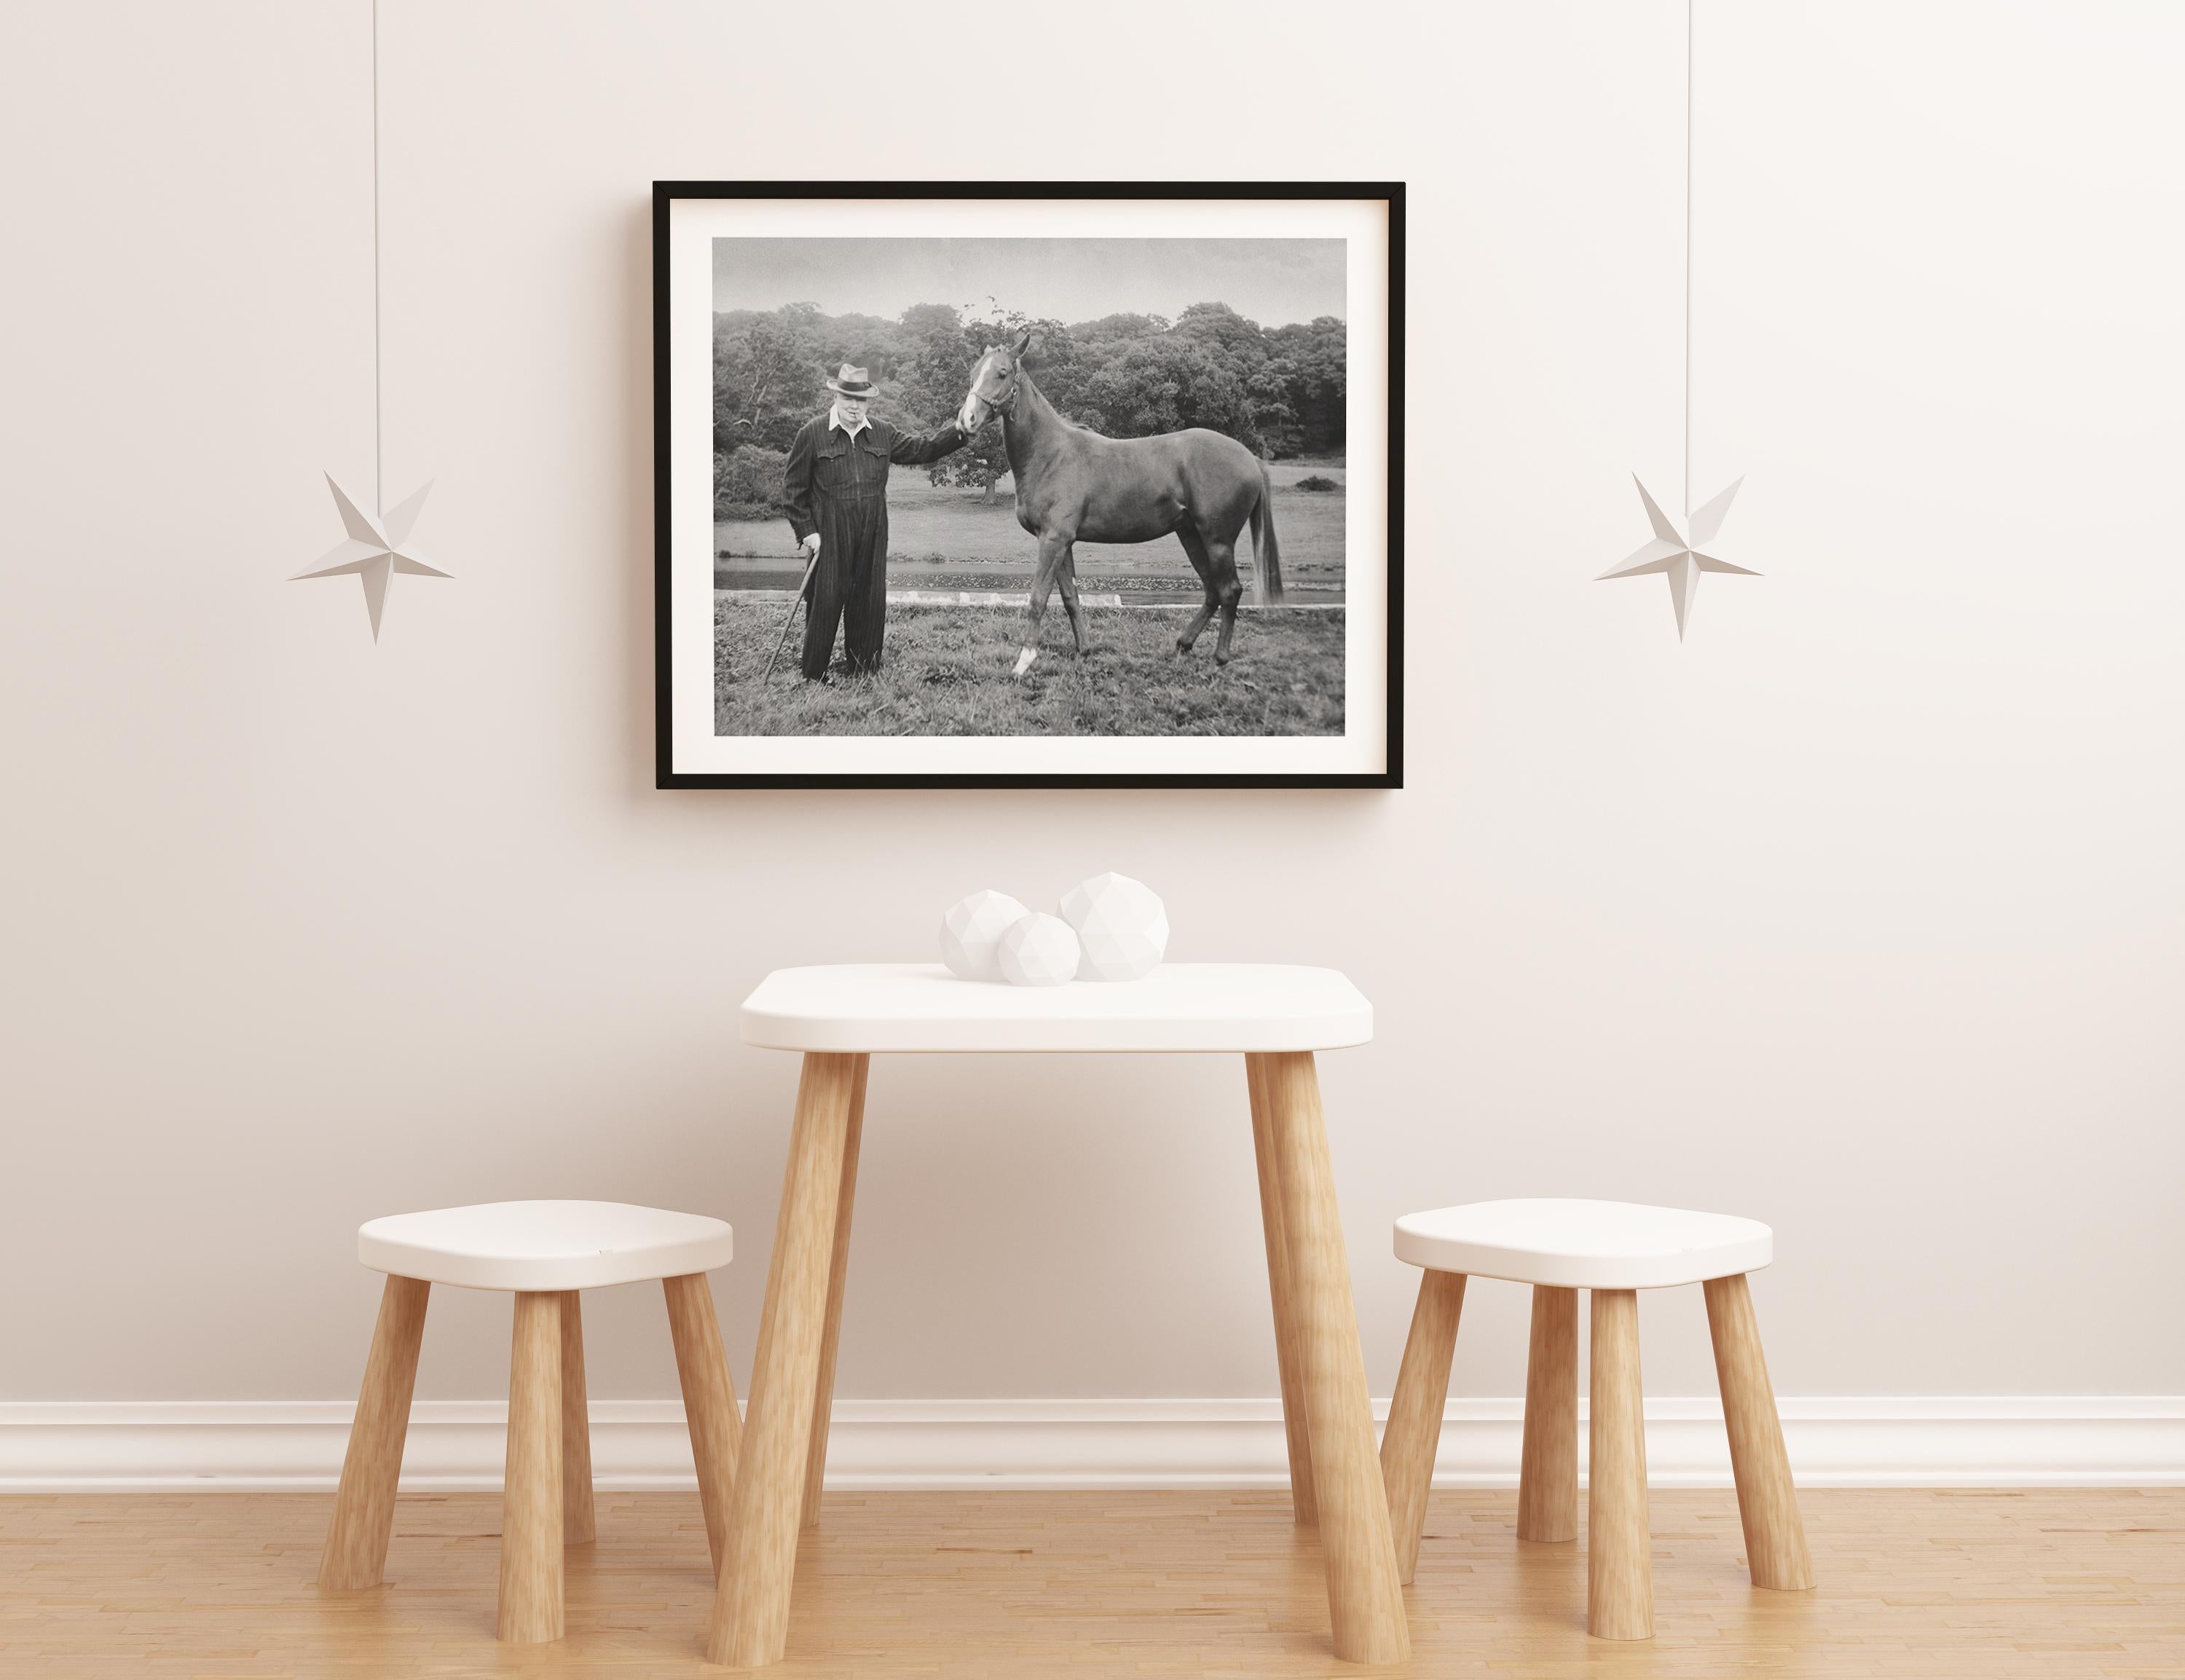 Winston Churchill with Horse Globe Photos Fine Art Print - Gray Portrait Photograph by Unknown